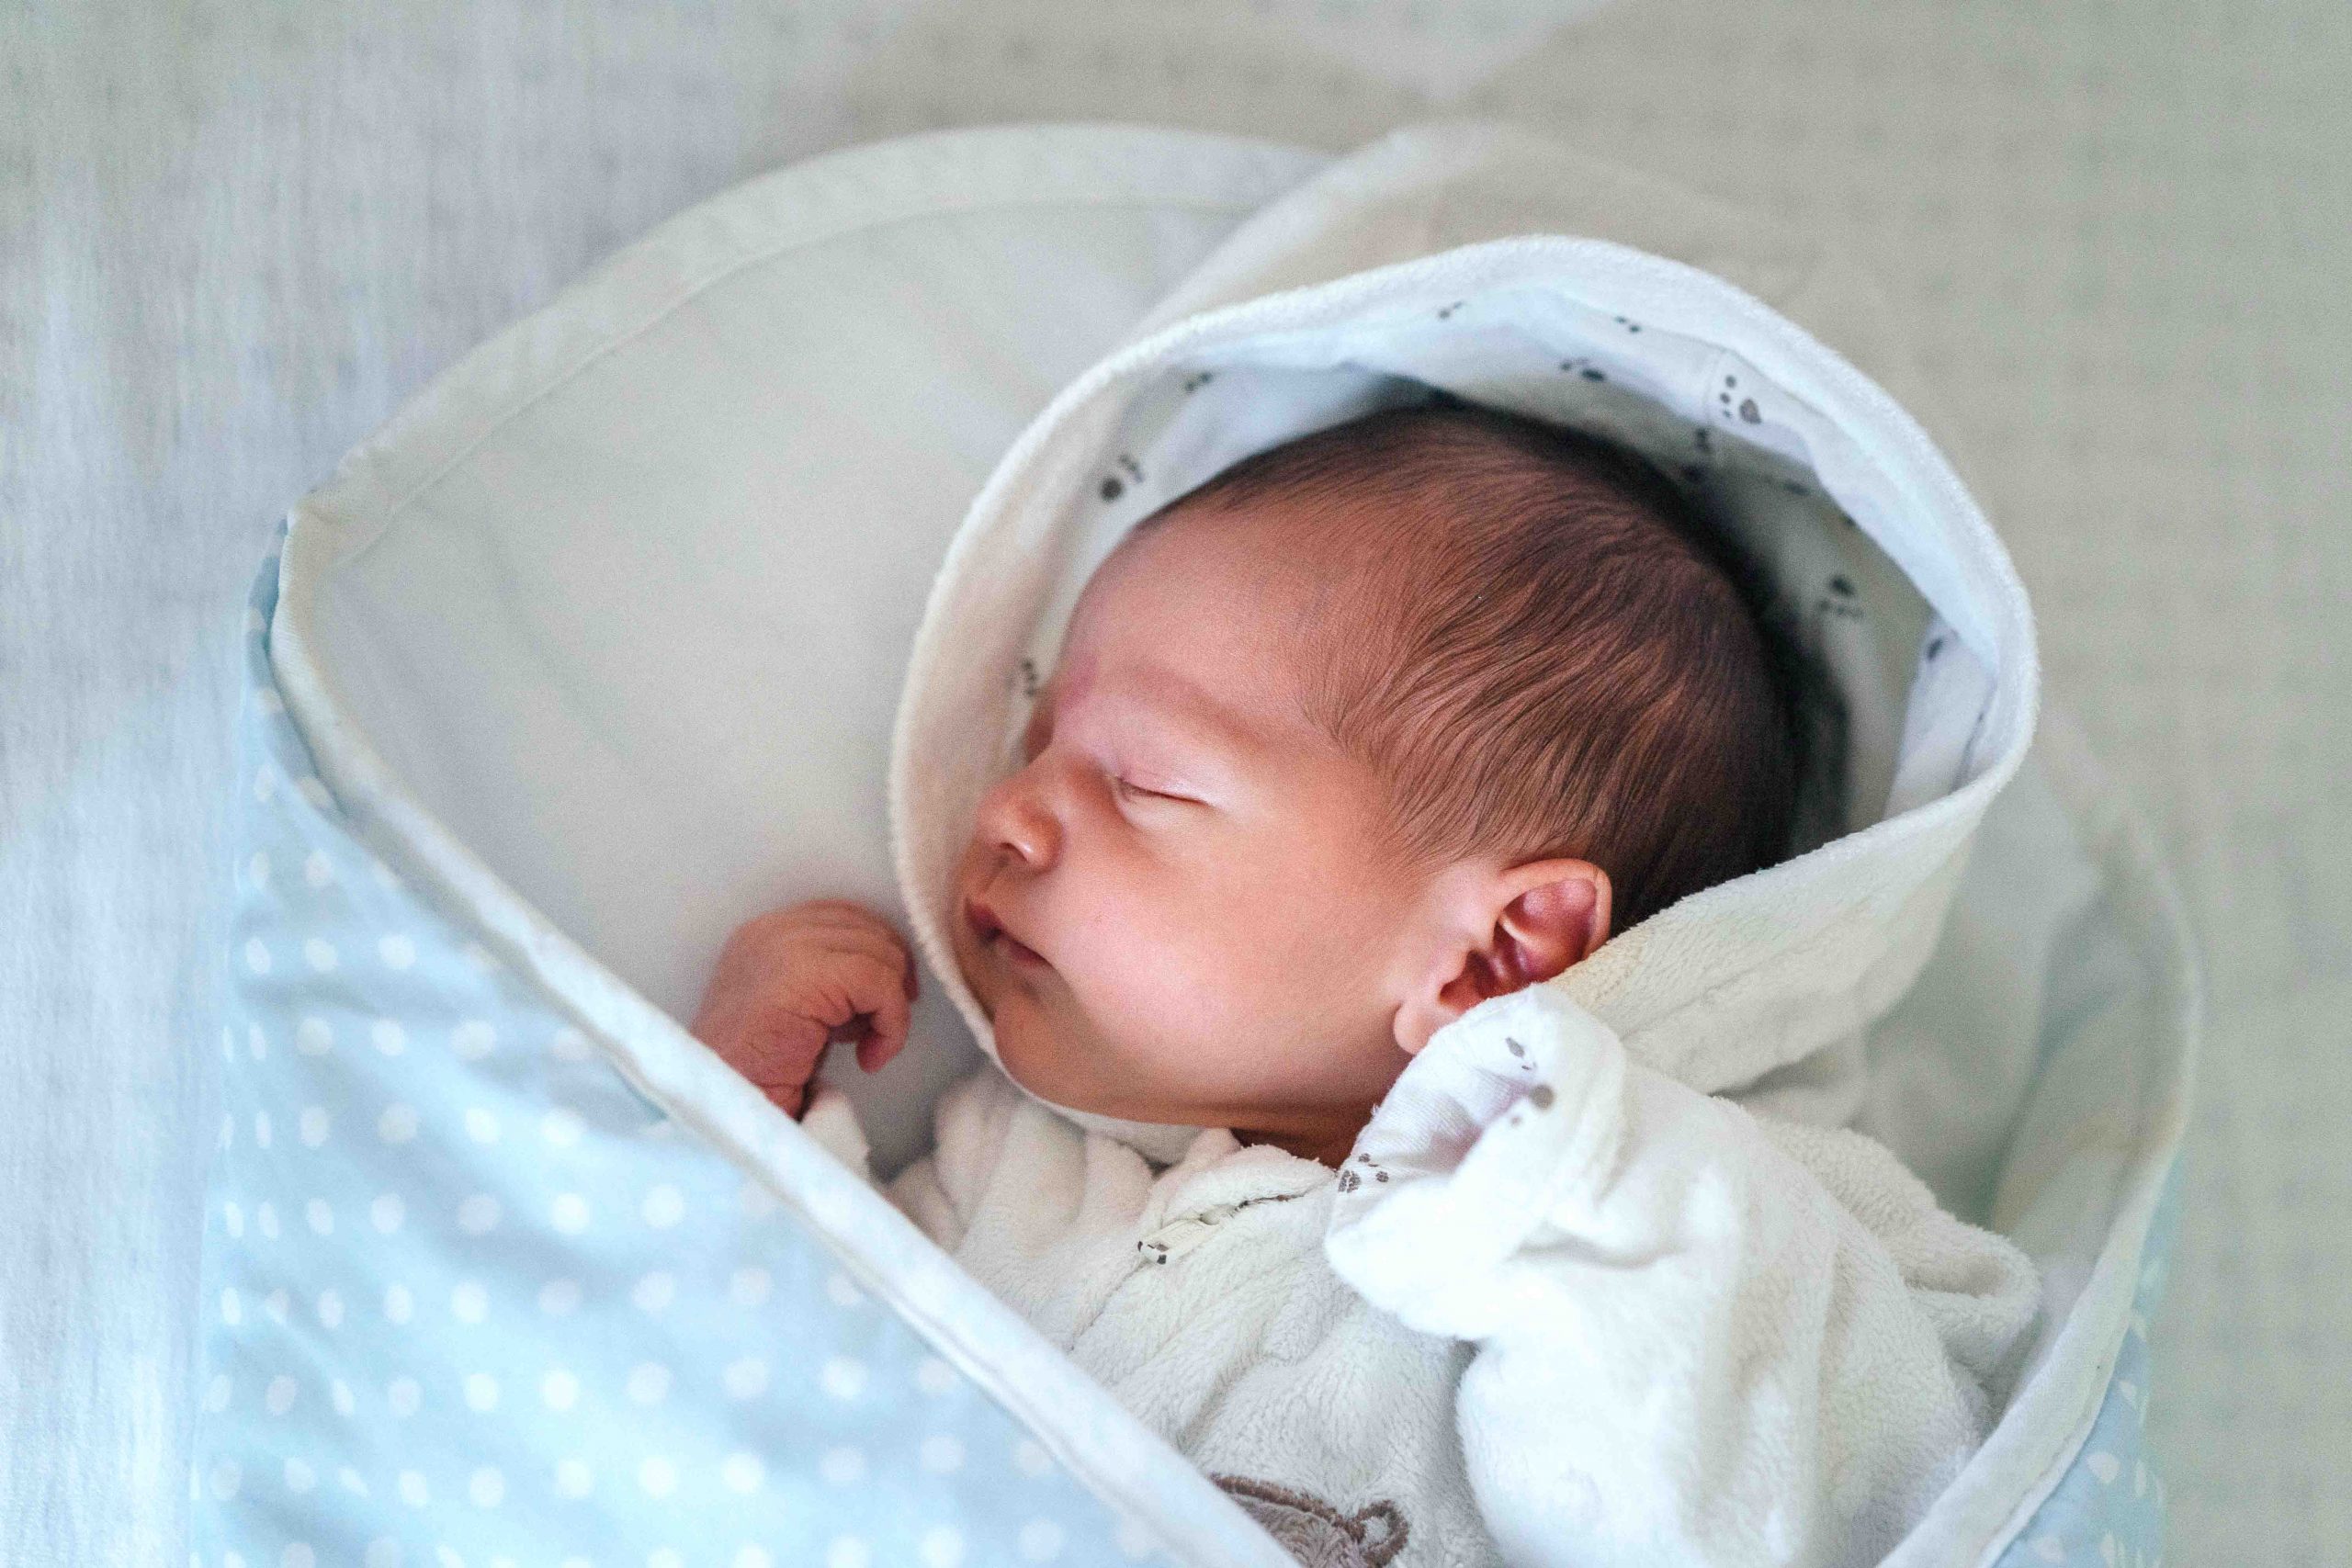 Top 5 Uses for Baby Receiving Blankets